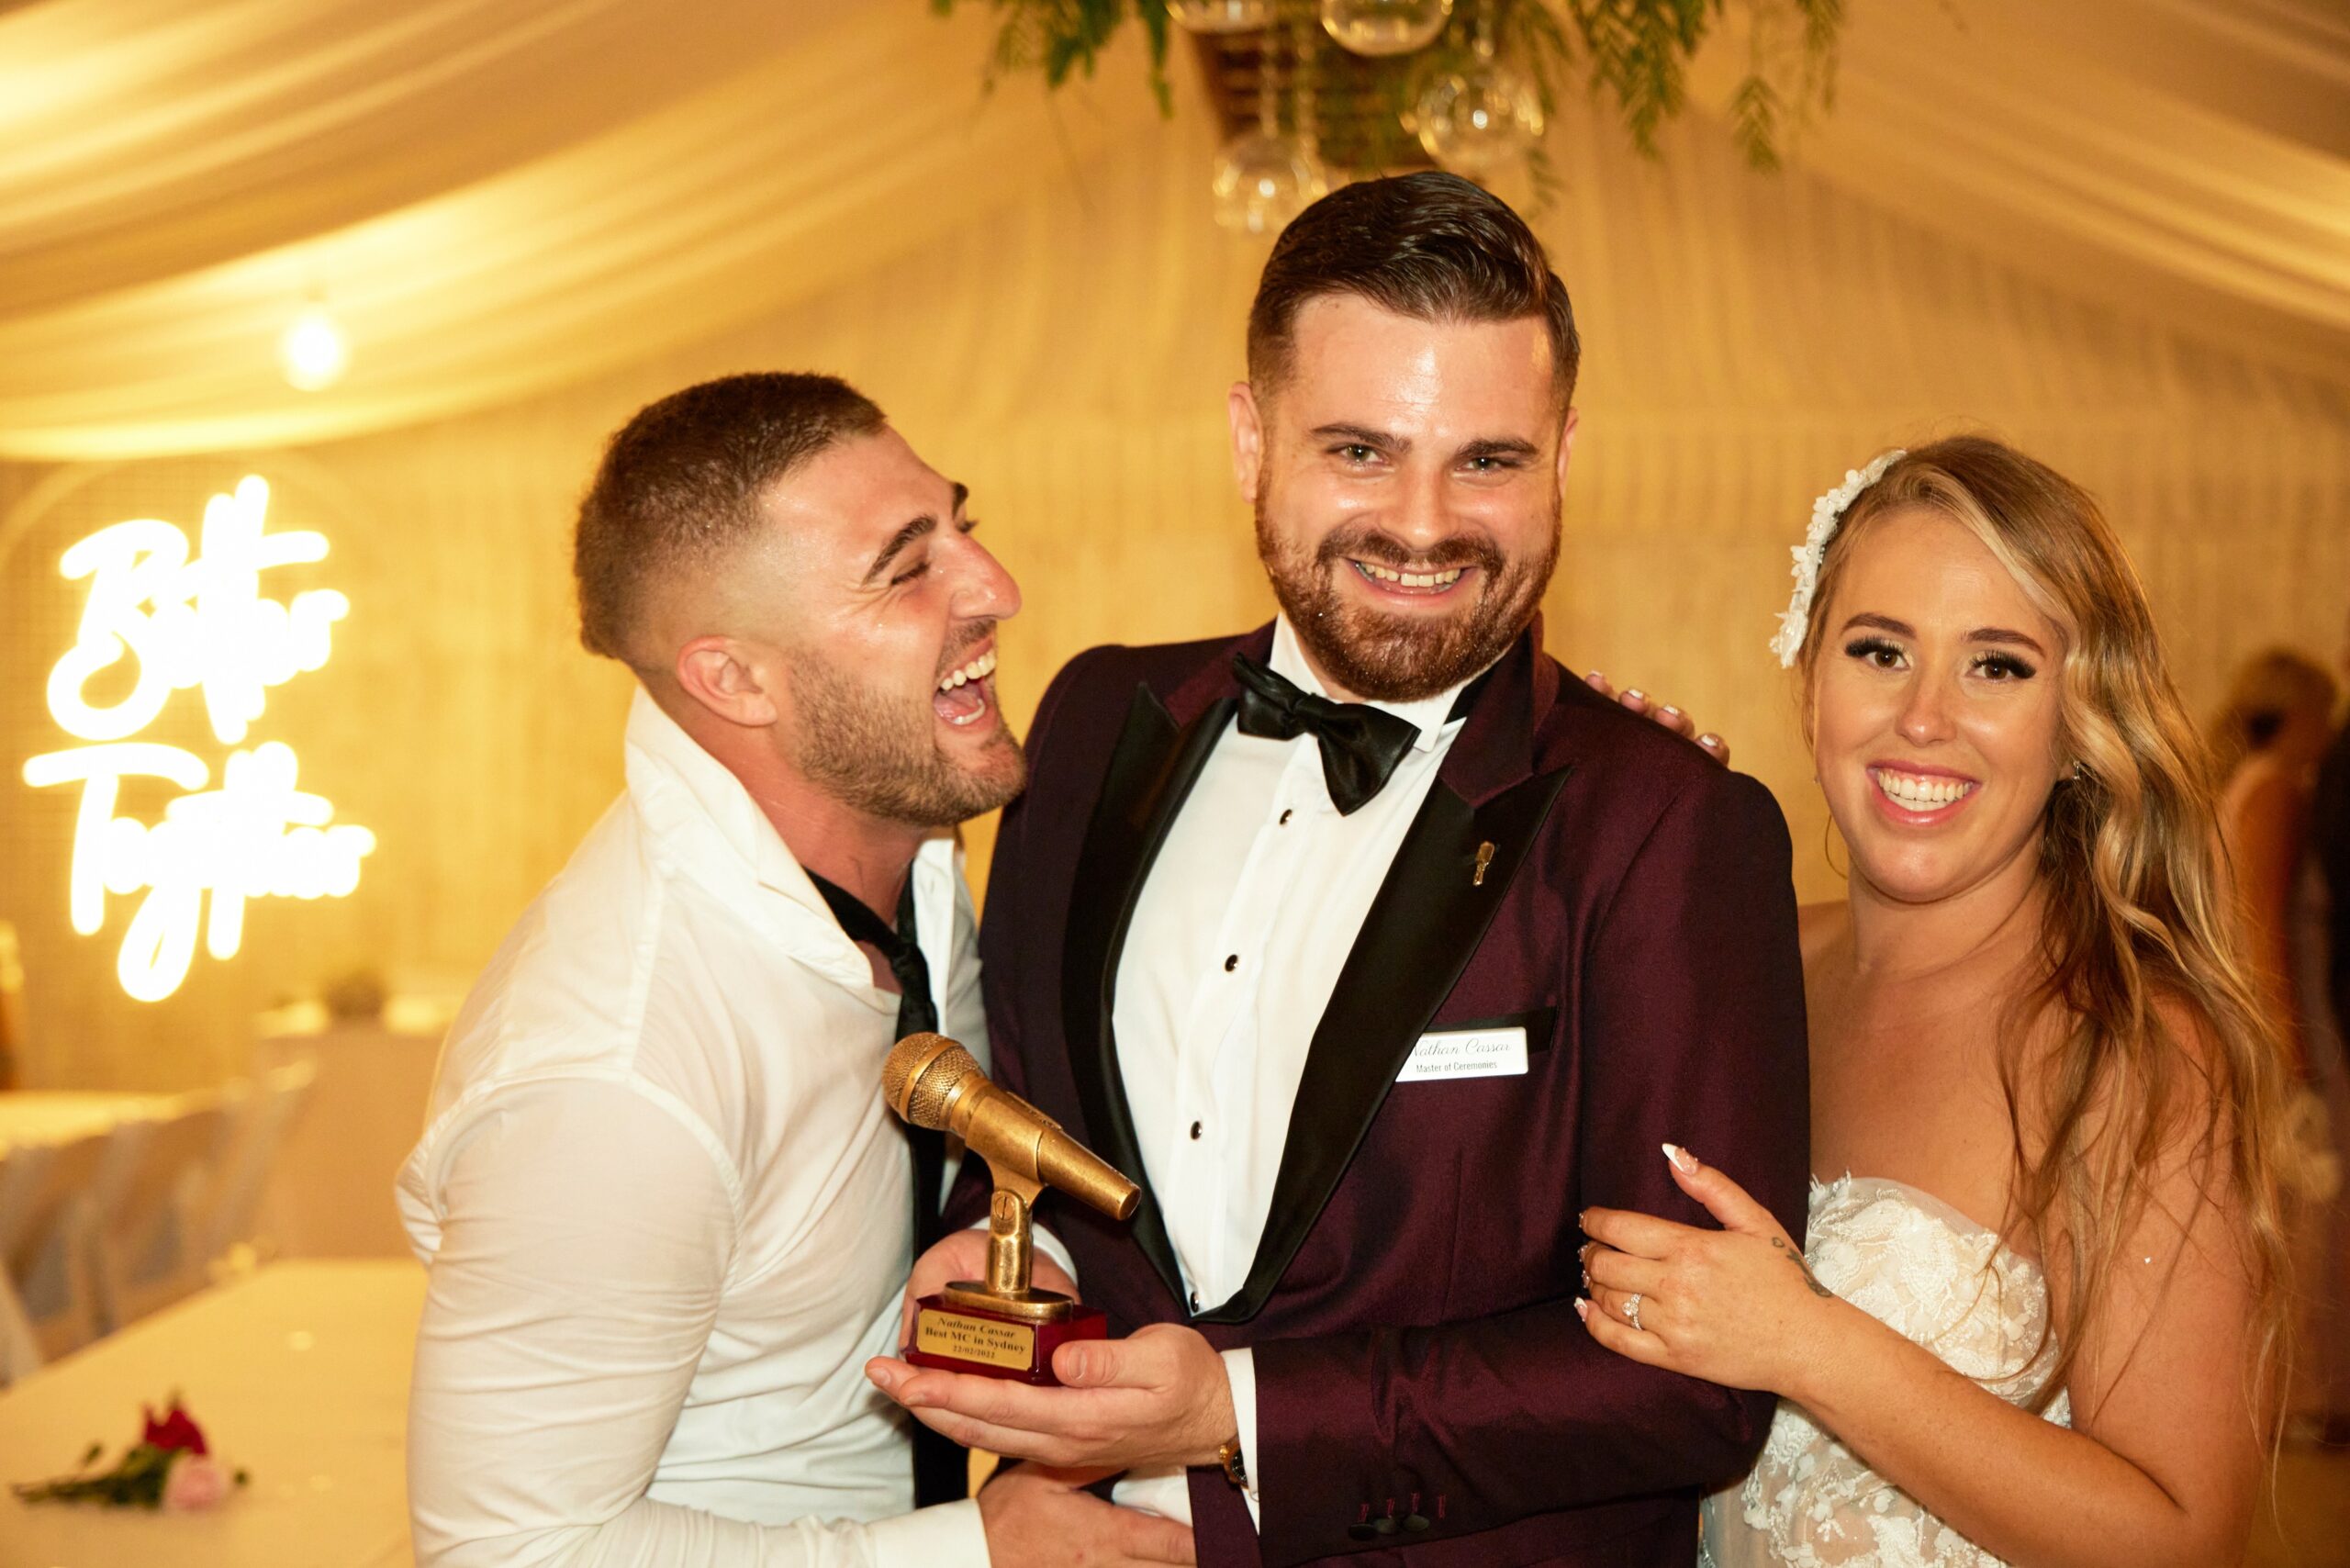 Nathan Cassar smiling while holding an award between a bride and groom